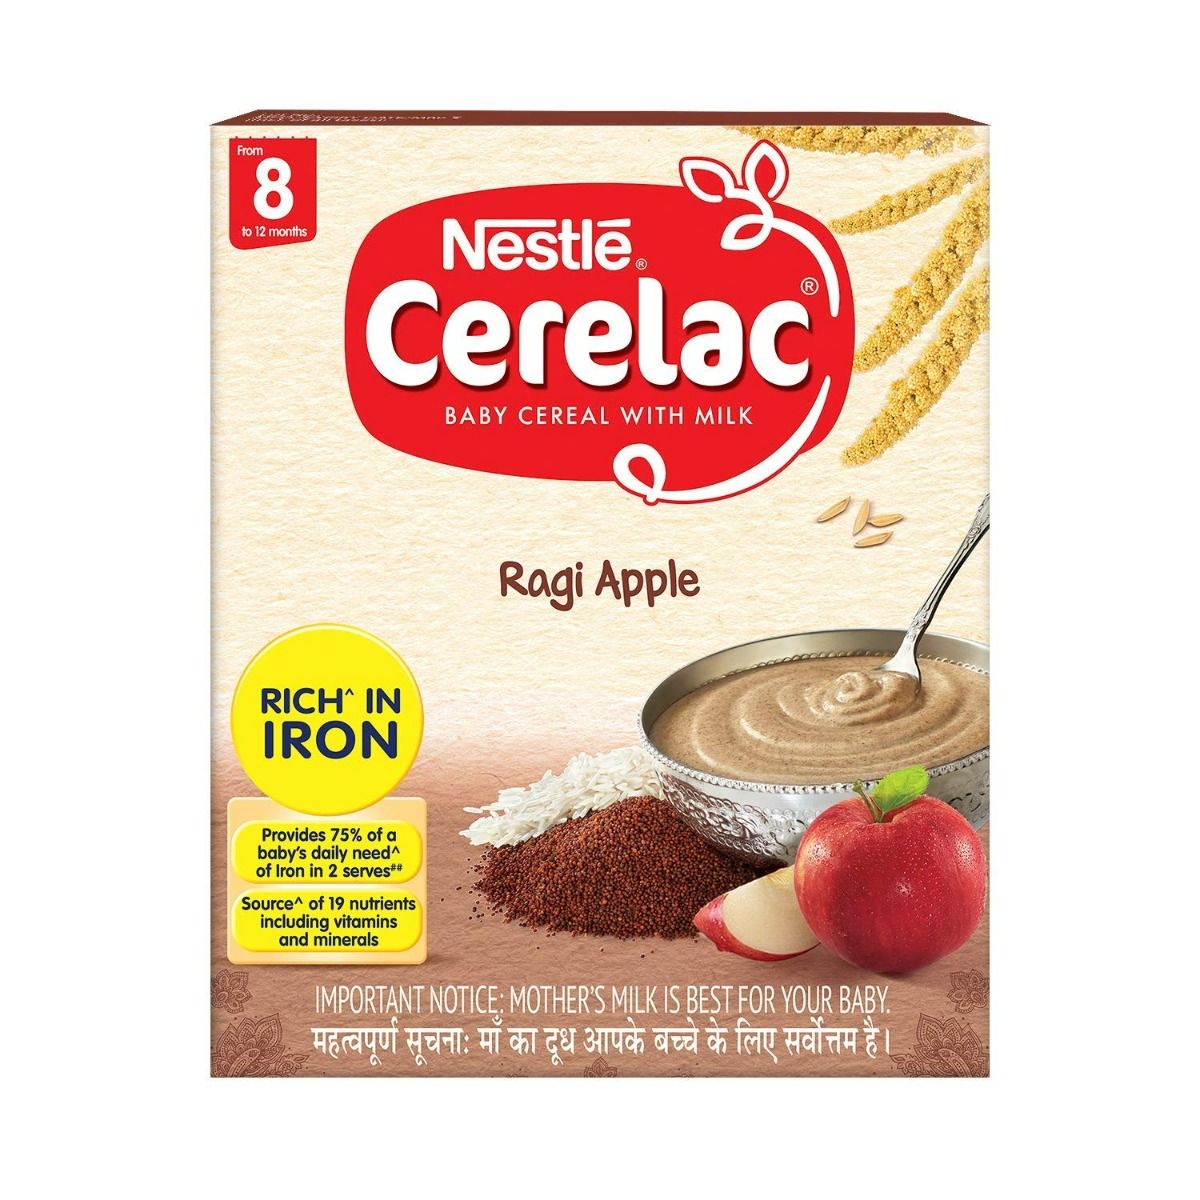 Buy Nestle Cerelac Ragi Apple Baby Cereal, 8 to 12 Months, 300 gm Refill Pack Online